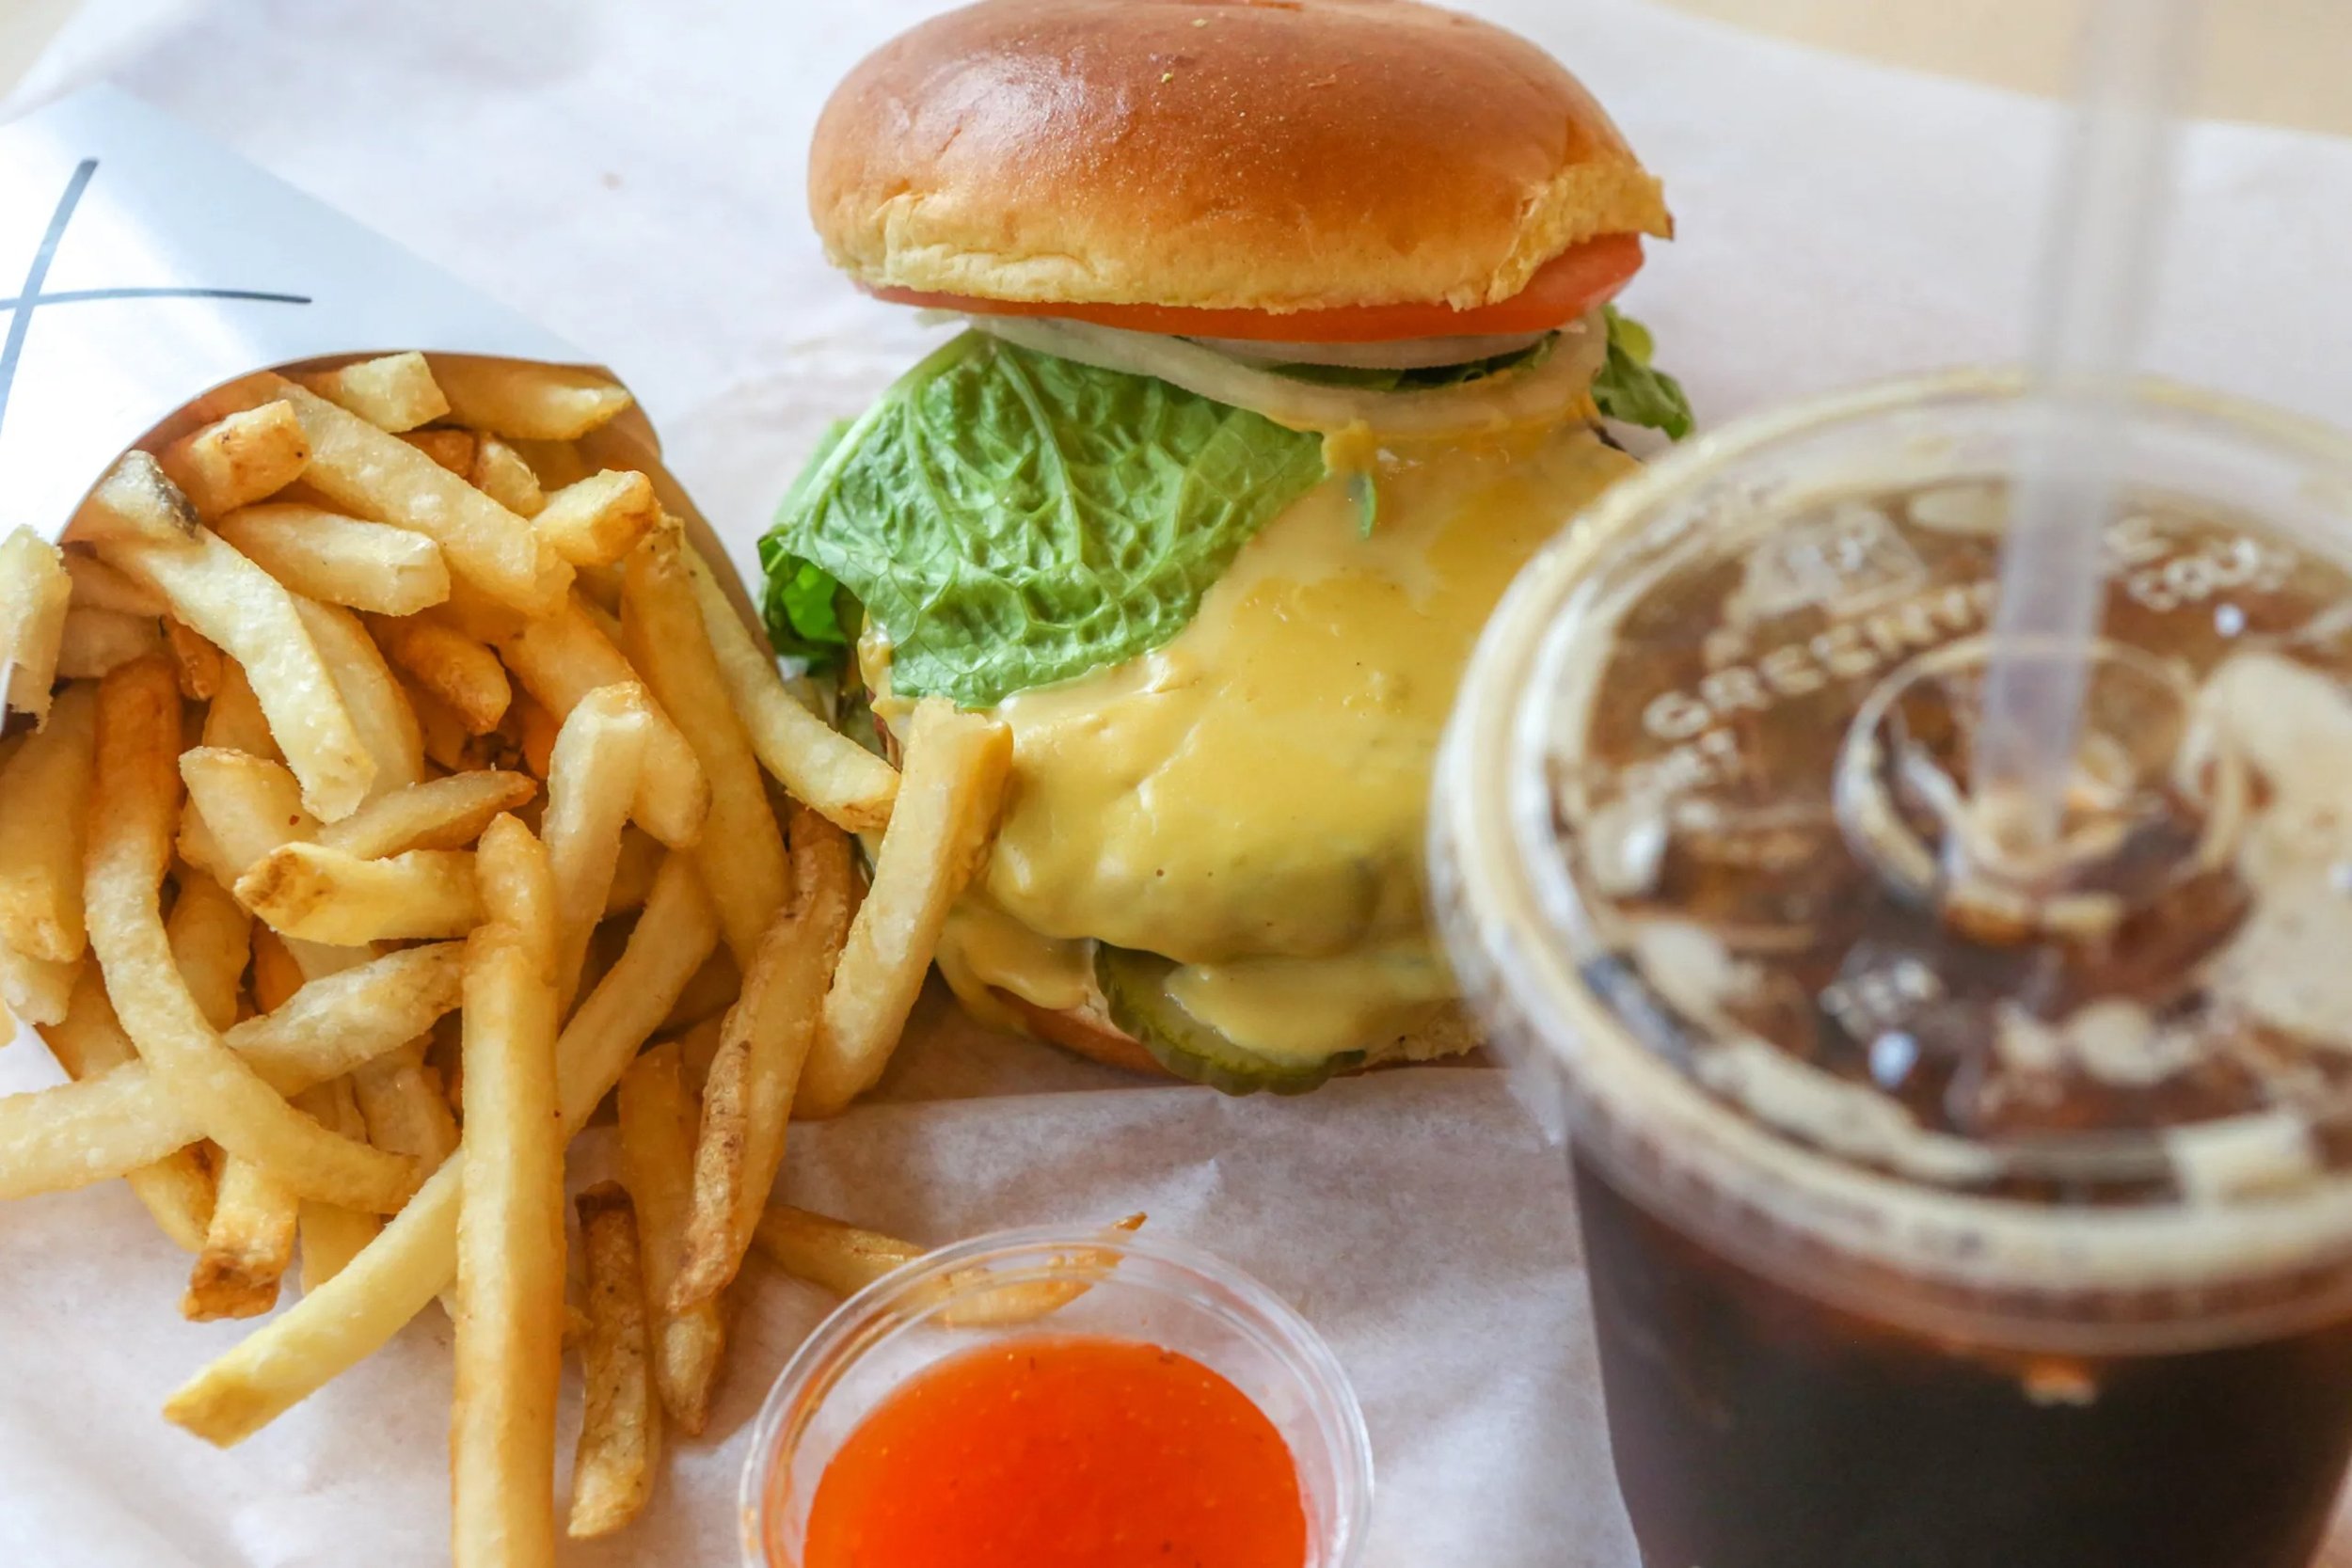  The X Burger can be enjoyed with the restaurant's signature bean, vegetable and grain patty or an Impossible Burger. It's topped with cashew cheddar sauce. Tractor Beverage Co. soda, an organic drink that comes in many flavors, including cola and ro